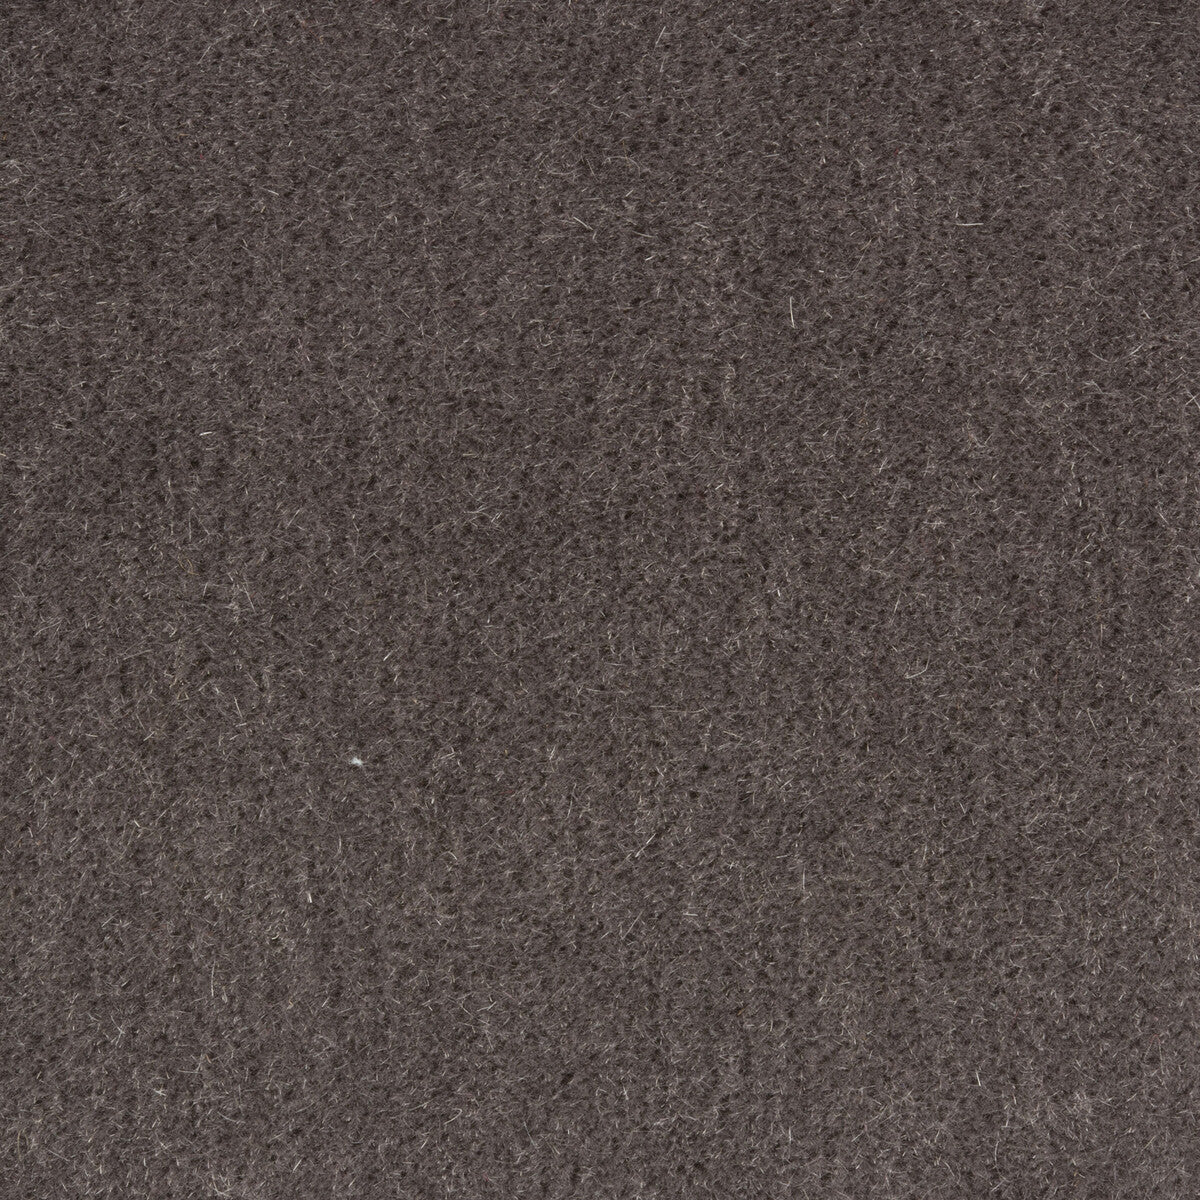 Windsor Mohair fabric in charcoal color - pattern 34258.21.0 - by Kravet Couture